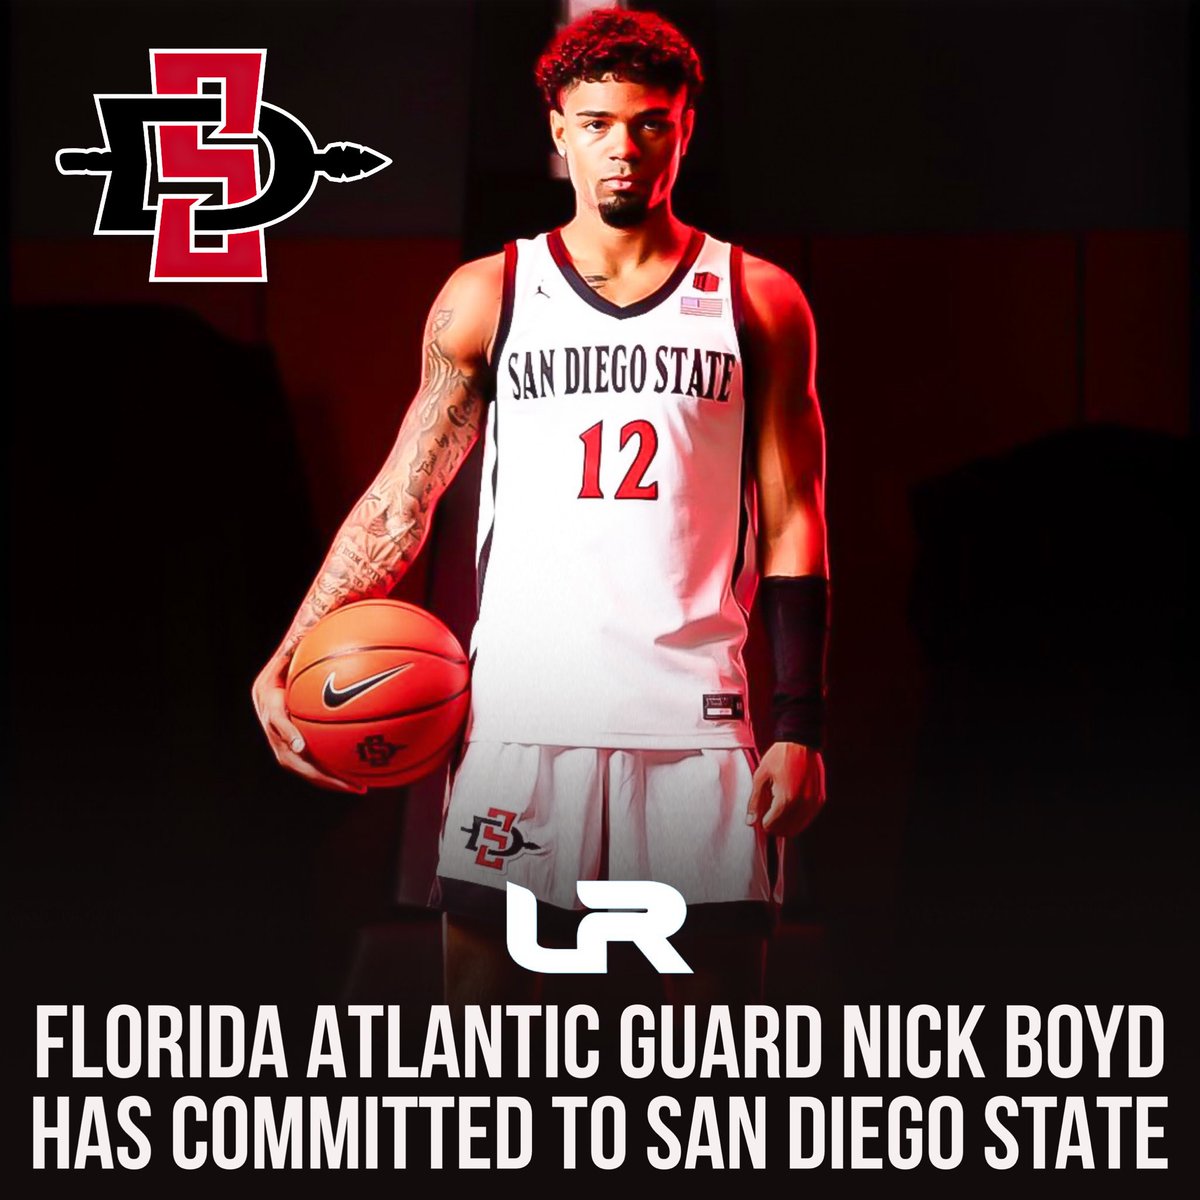 NEWS: Florida Atlantic guard Nick Boyd has committed to San Diego State, per his IG. Boyd has played three seasons for FAU and has started 51 of 88 games played throughout his career. Native of Garnerville, New York. He averaged 9.3PPG, 2.7RPG and 1.8APG this season.